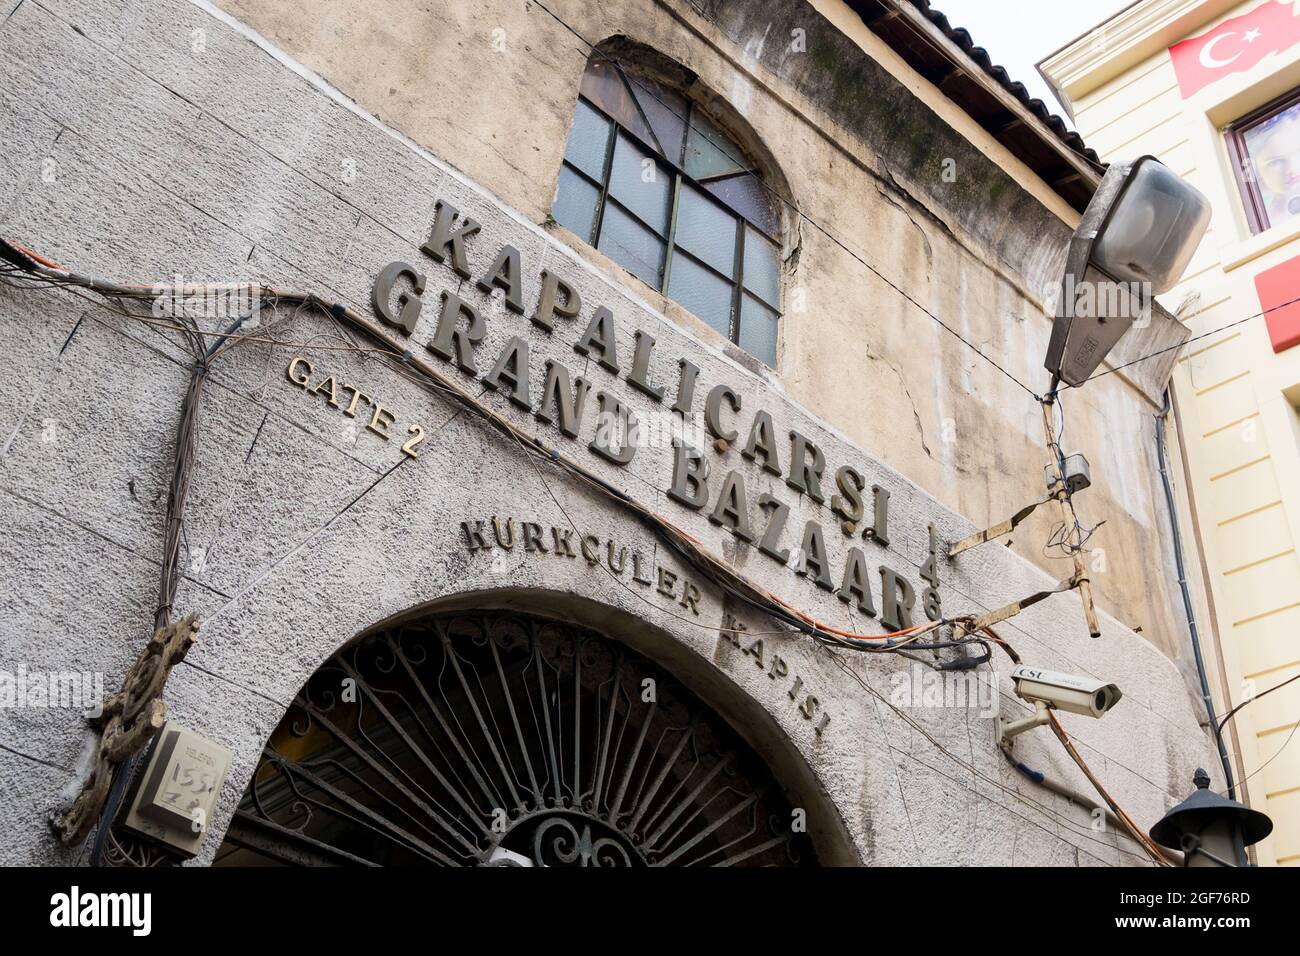 The Kapalicarsi Grand Bazzar entrance to the huge shopping arcade. In Istanbul, Turkey. Stock Photo